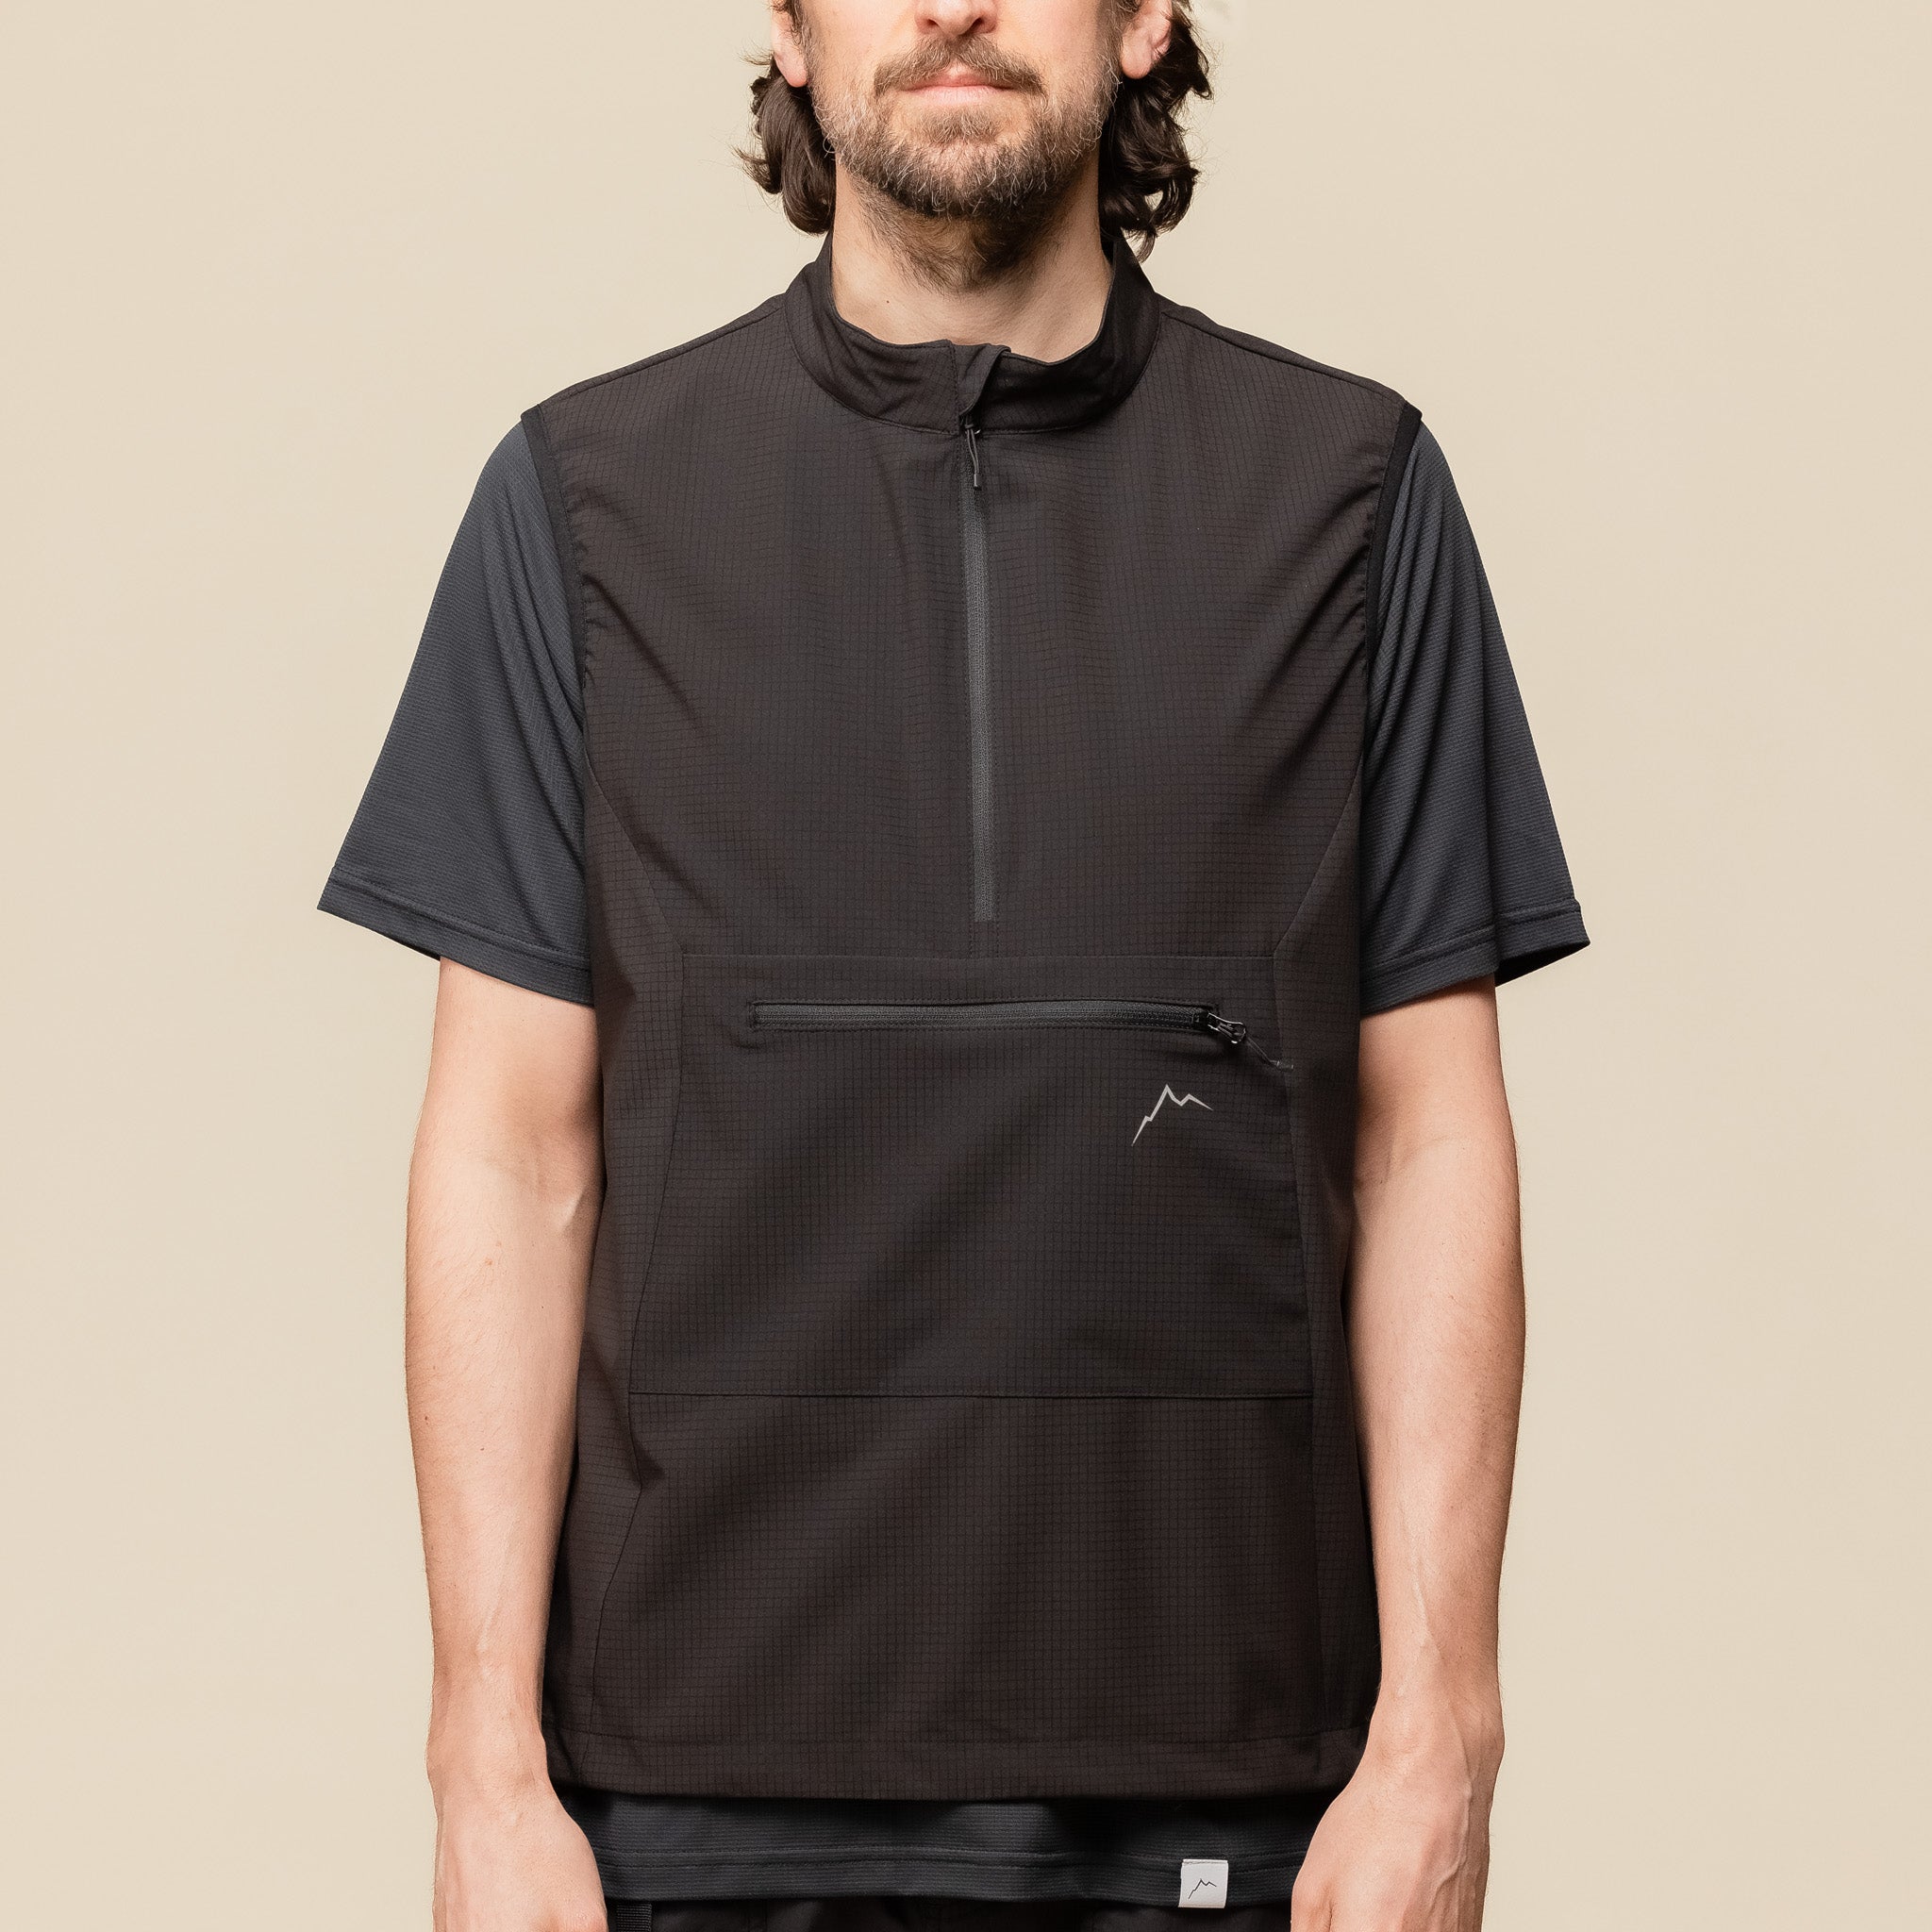 CAYL "Climb As You Love" - Flow Pullover Vest - Black